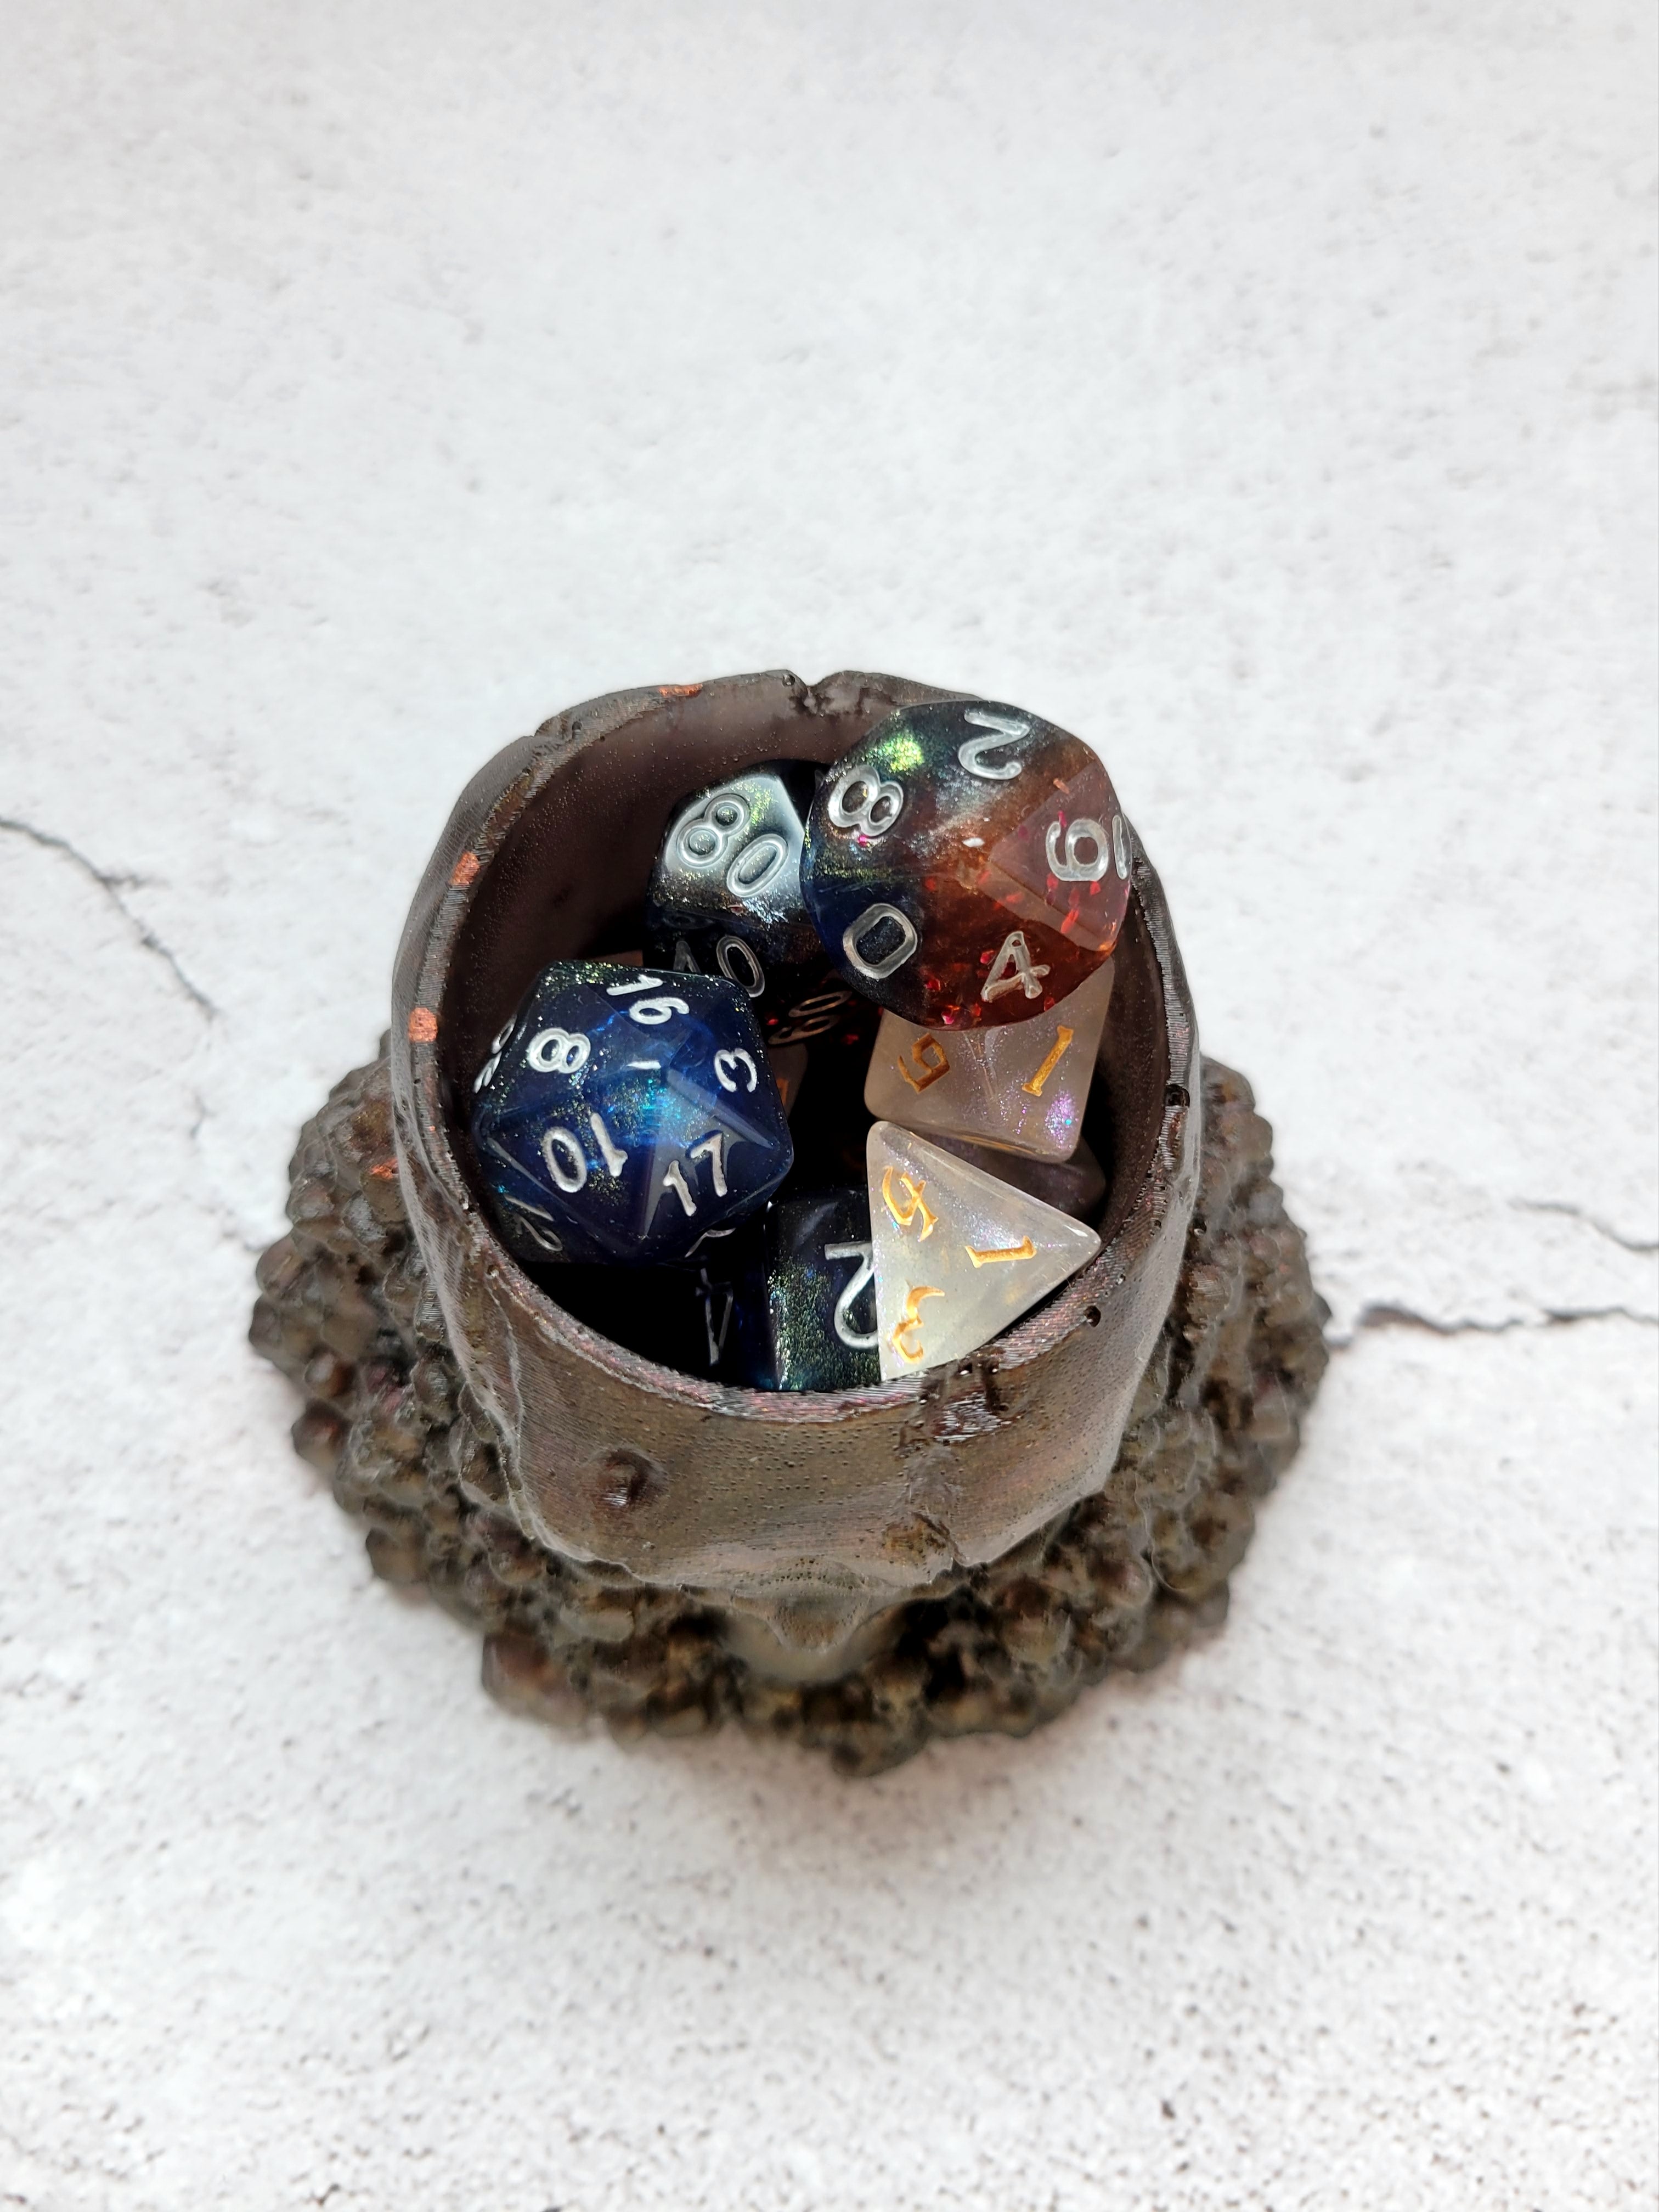 Resin skull dice cup. Big skull holds 2 sets of ttrpg dice comfortably with room for a few extra. The large skull sits on a pile of stones and smaller skulls. The color is a bronze reddish brown. top view with dice inside